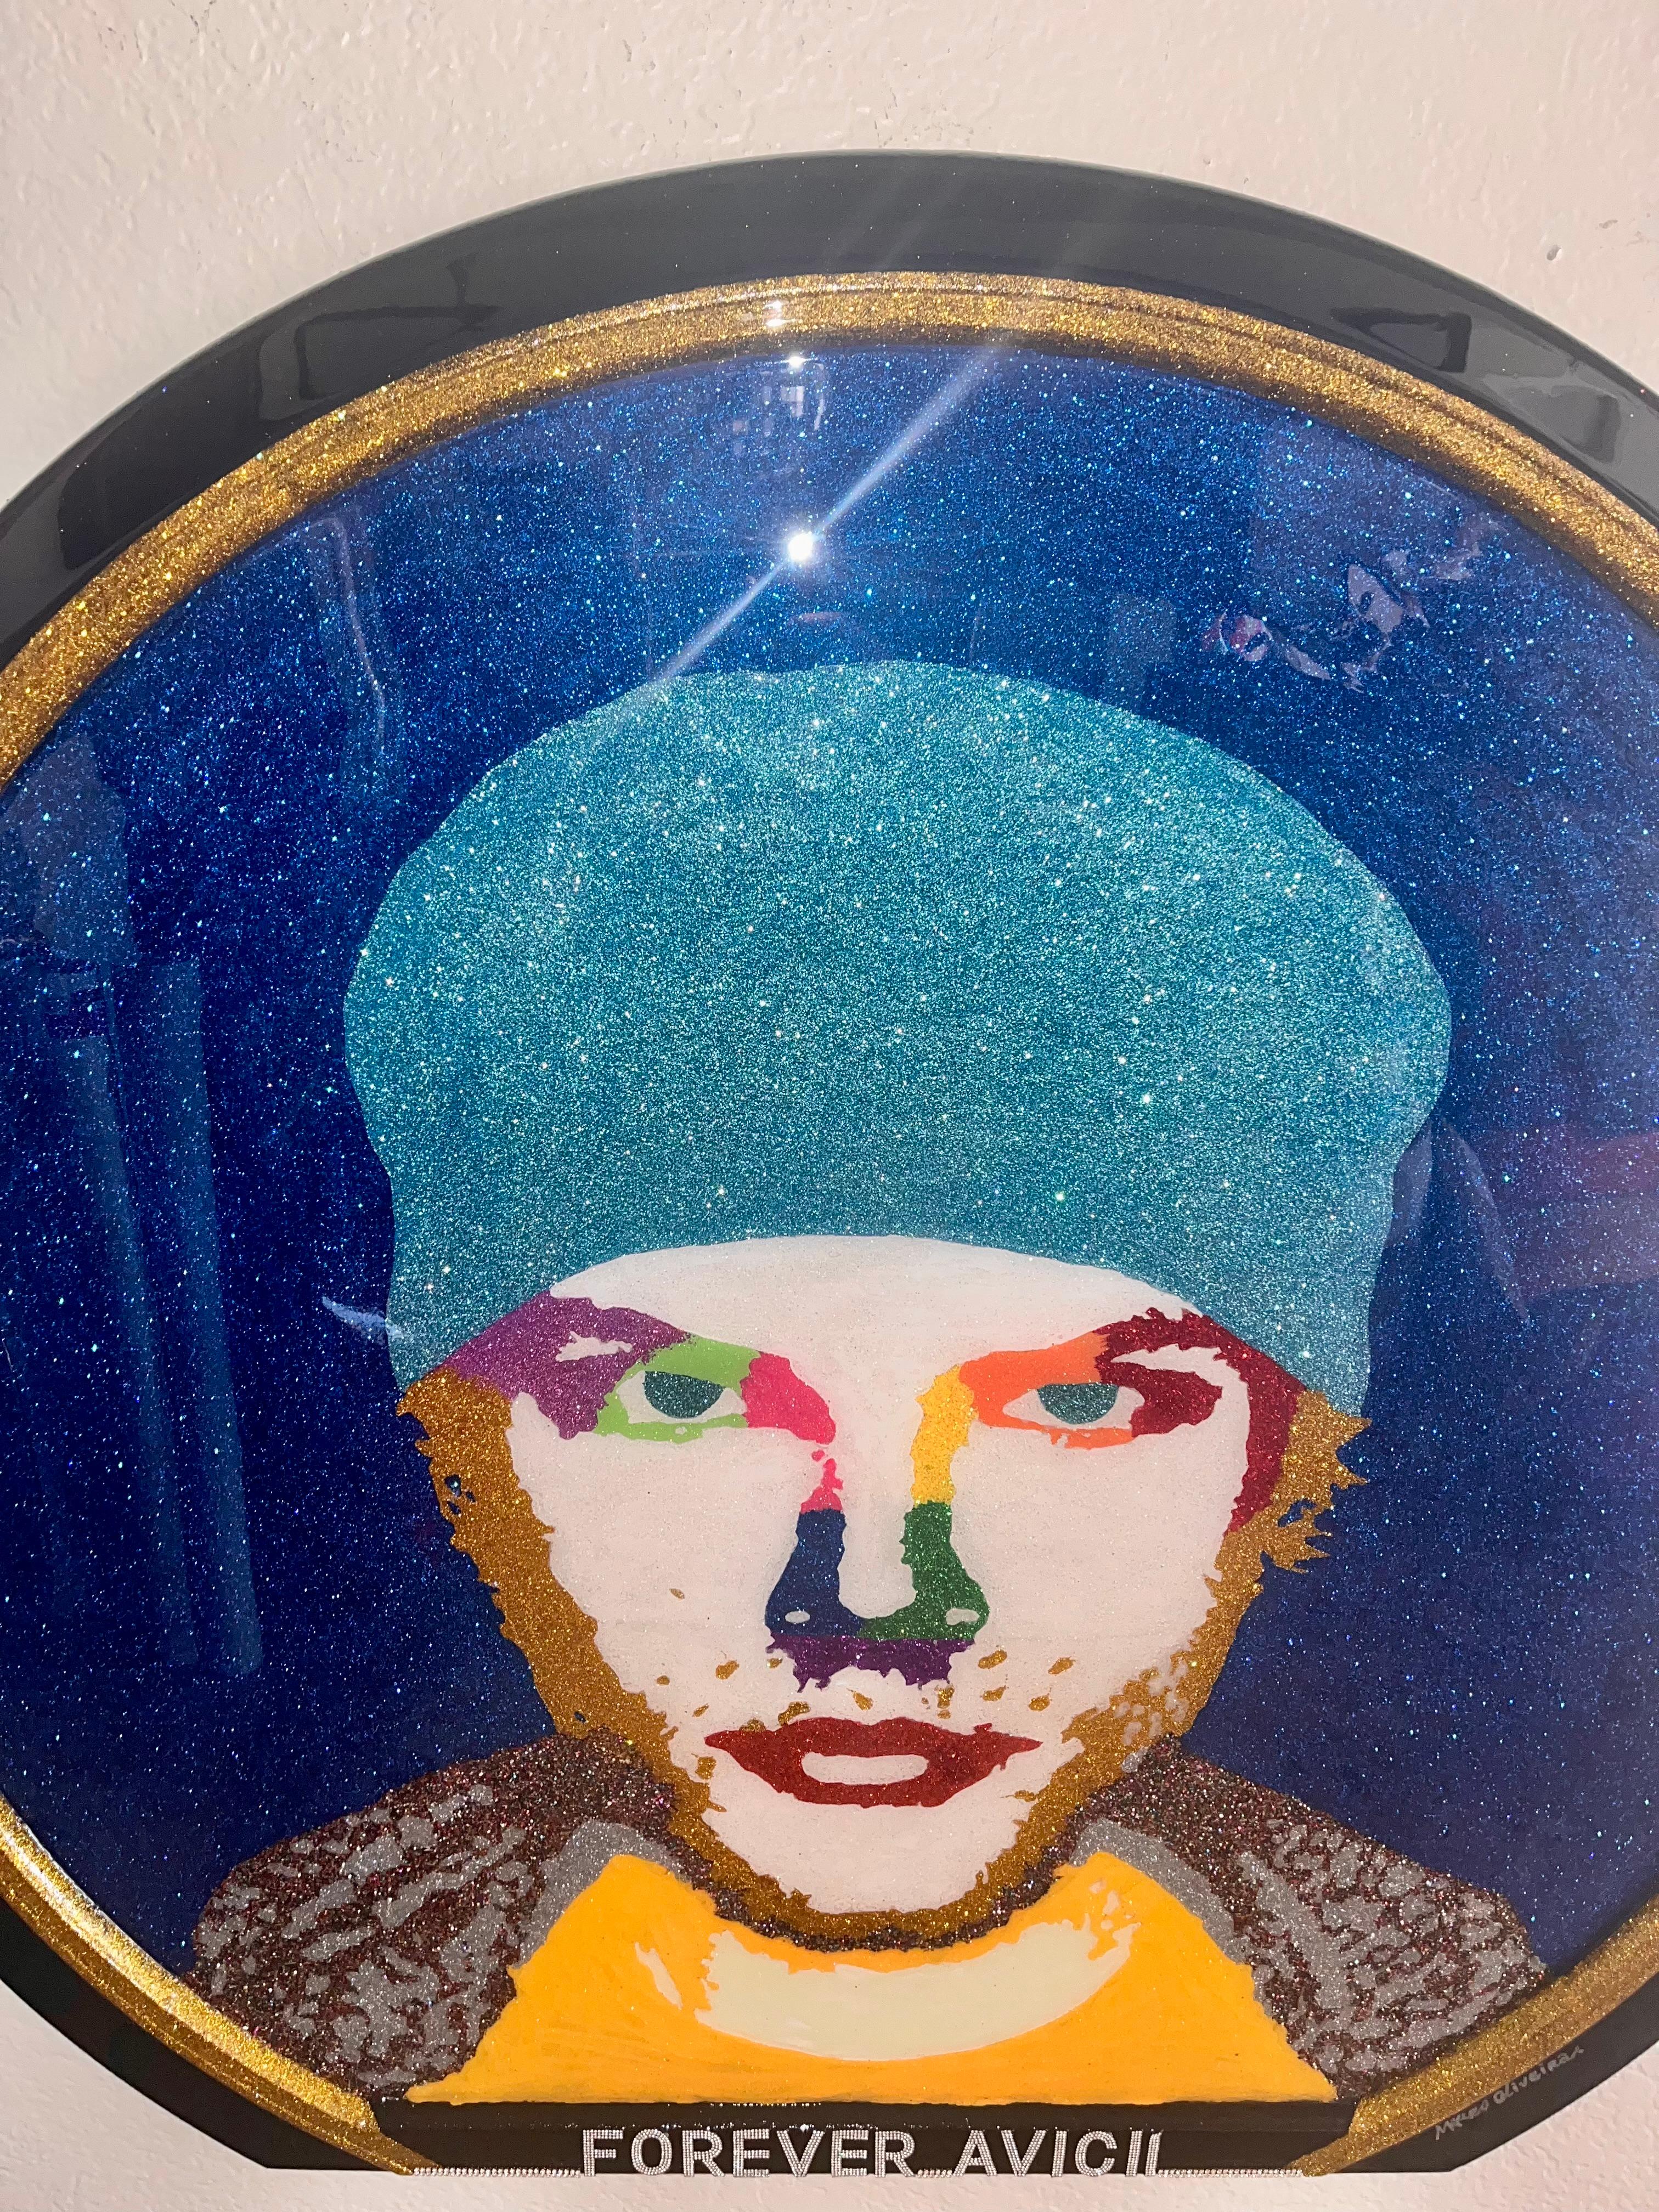 FOREVER AVICII (Original And One Of A Kind Mixed Media Art Masterpiece) For Sale 8